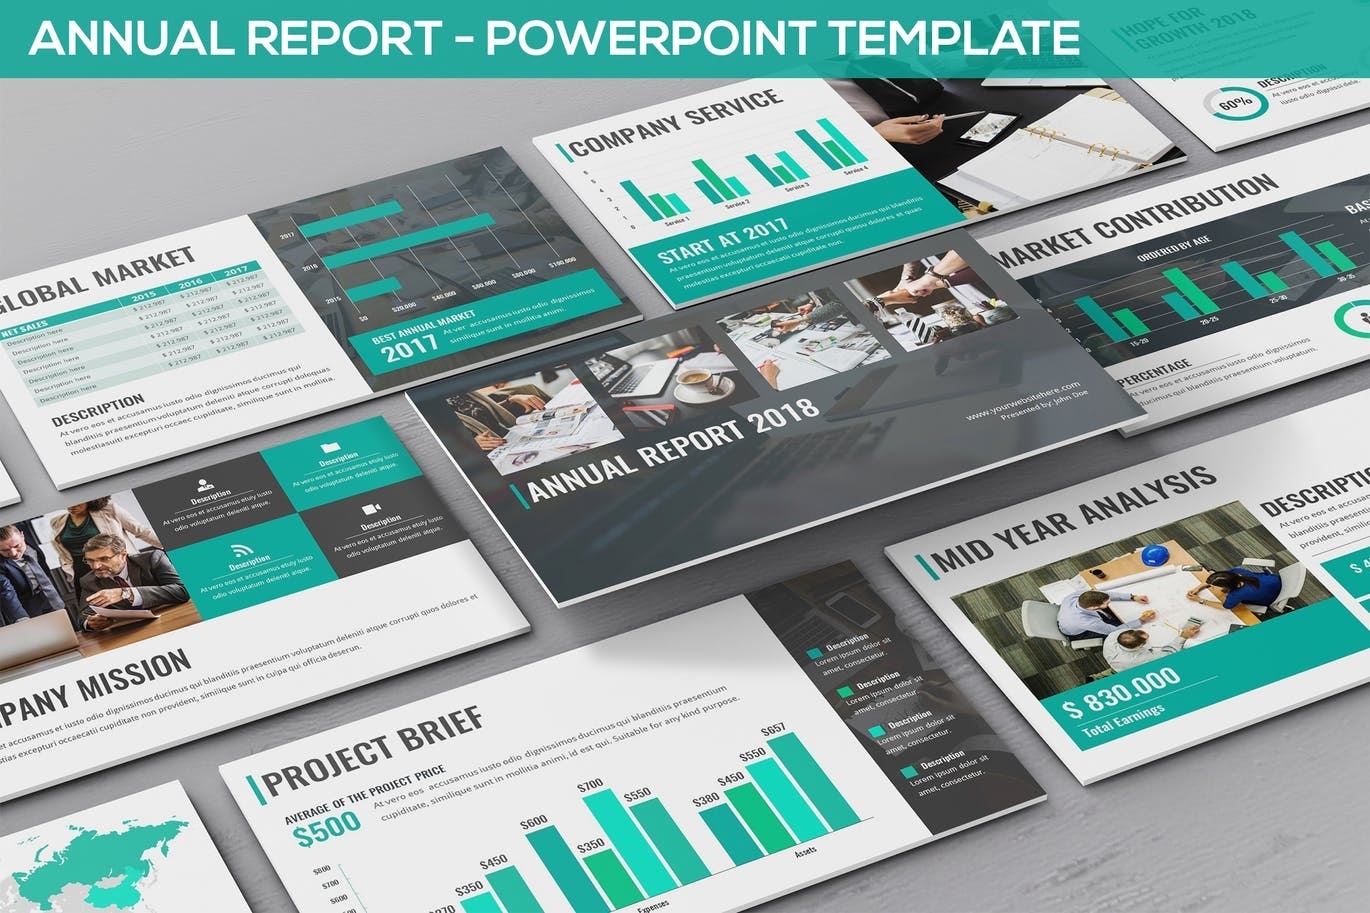 Powerpoint Presentation Template Design & Layout | Brand Store Within Where Are Powerpoint Templates Stored